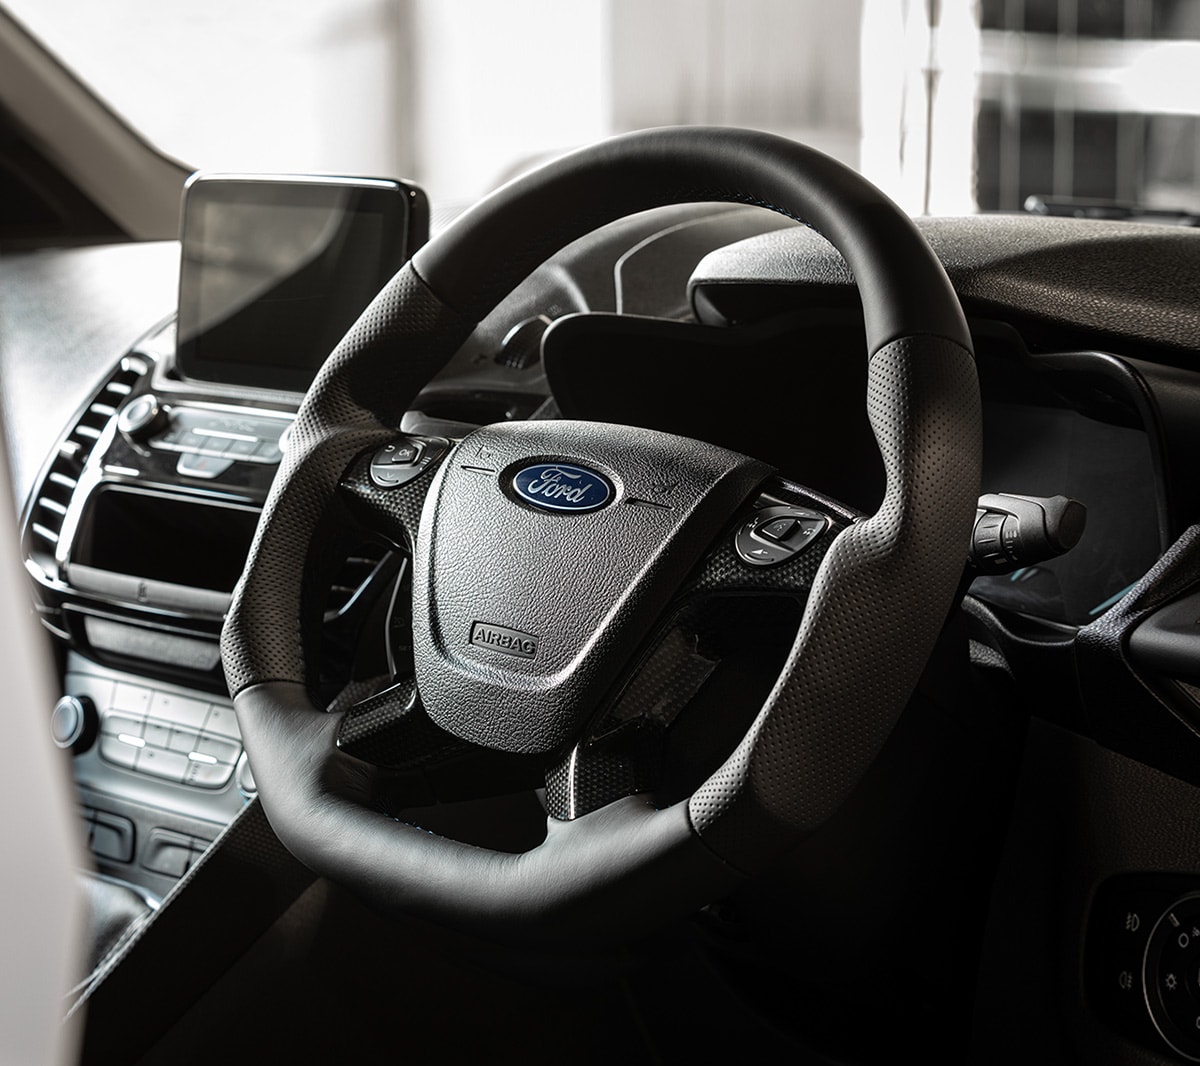 Interior photo of the Ford Transit Custom MS-RT showing the sterring wheel and dashboard.